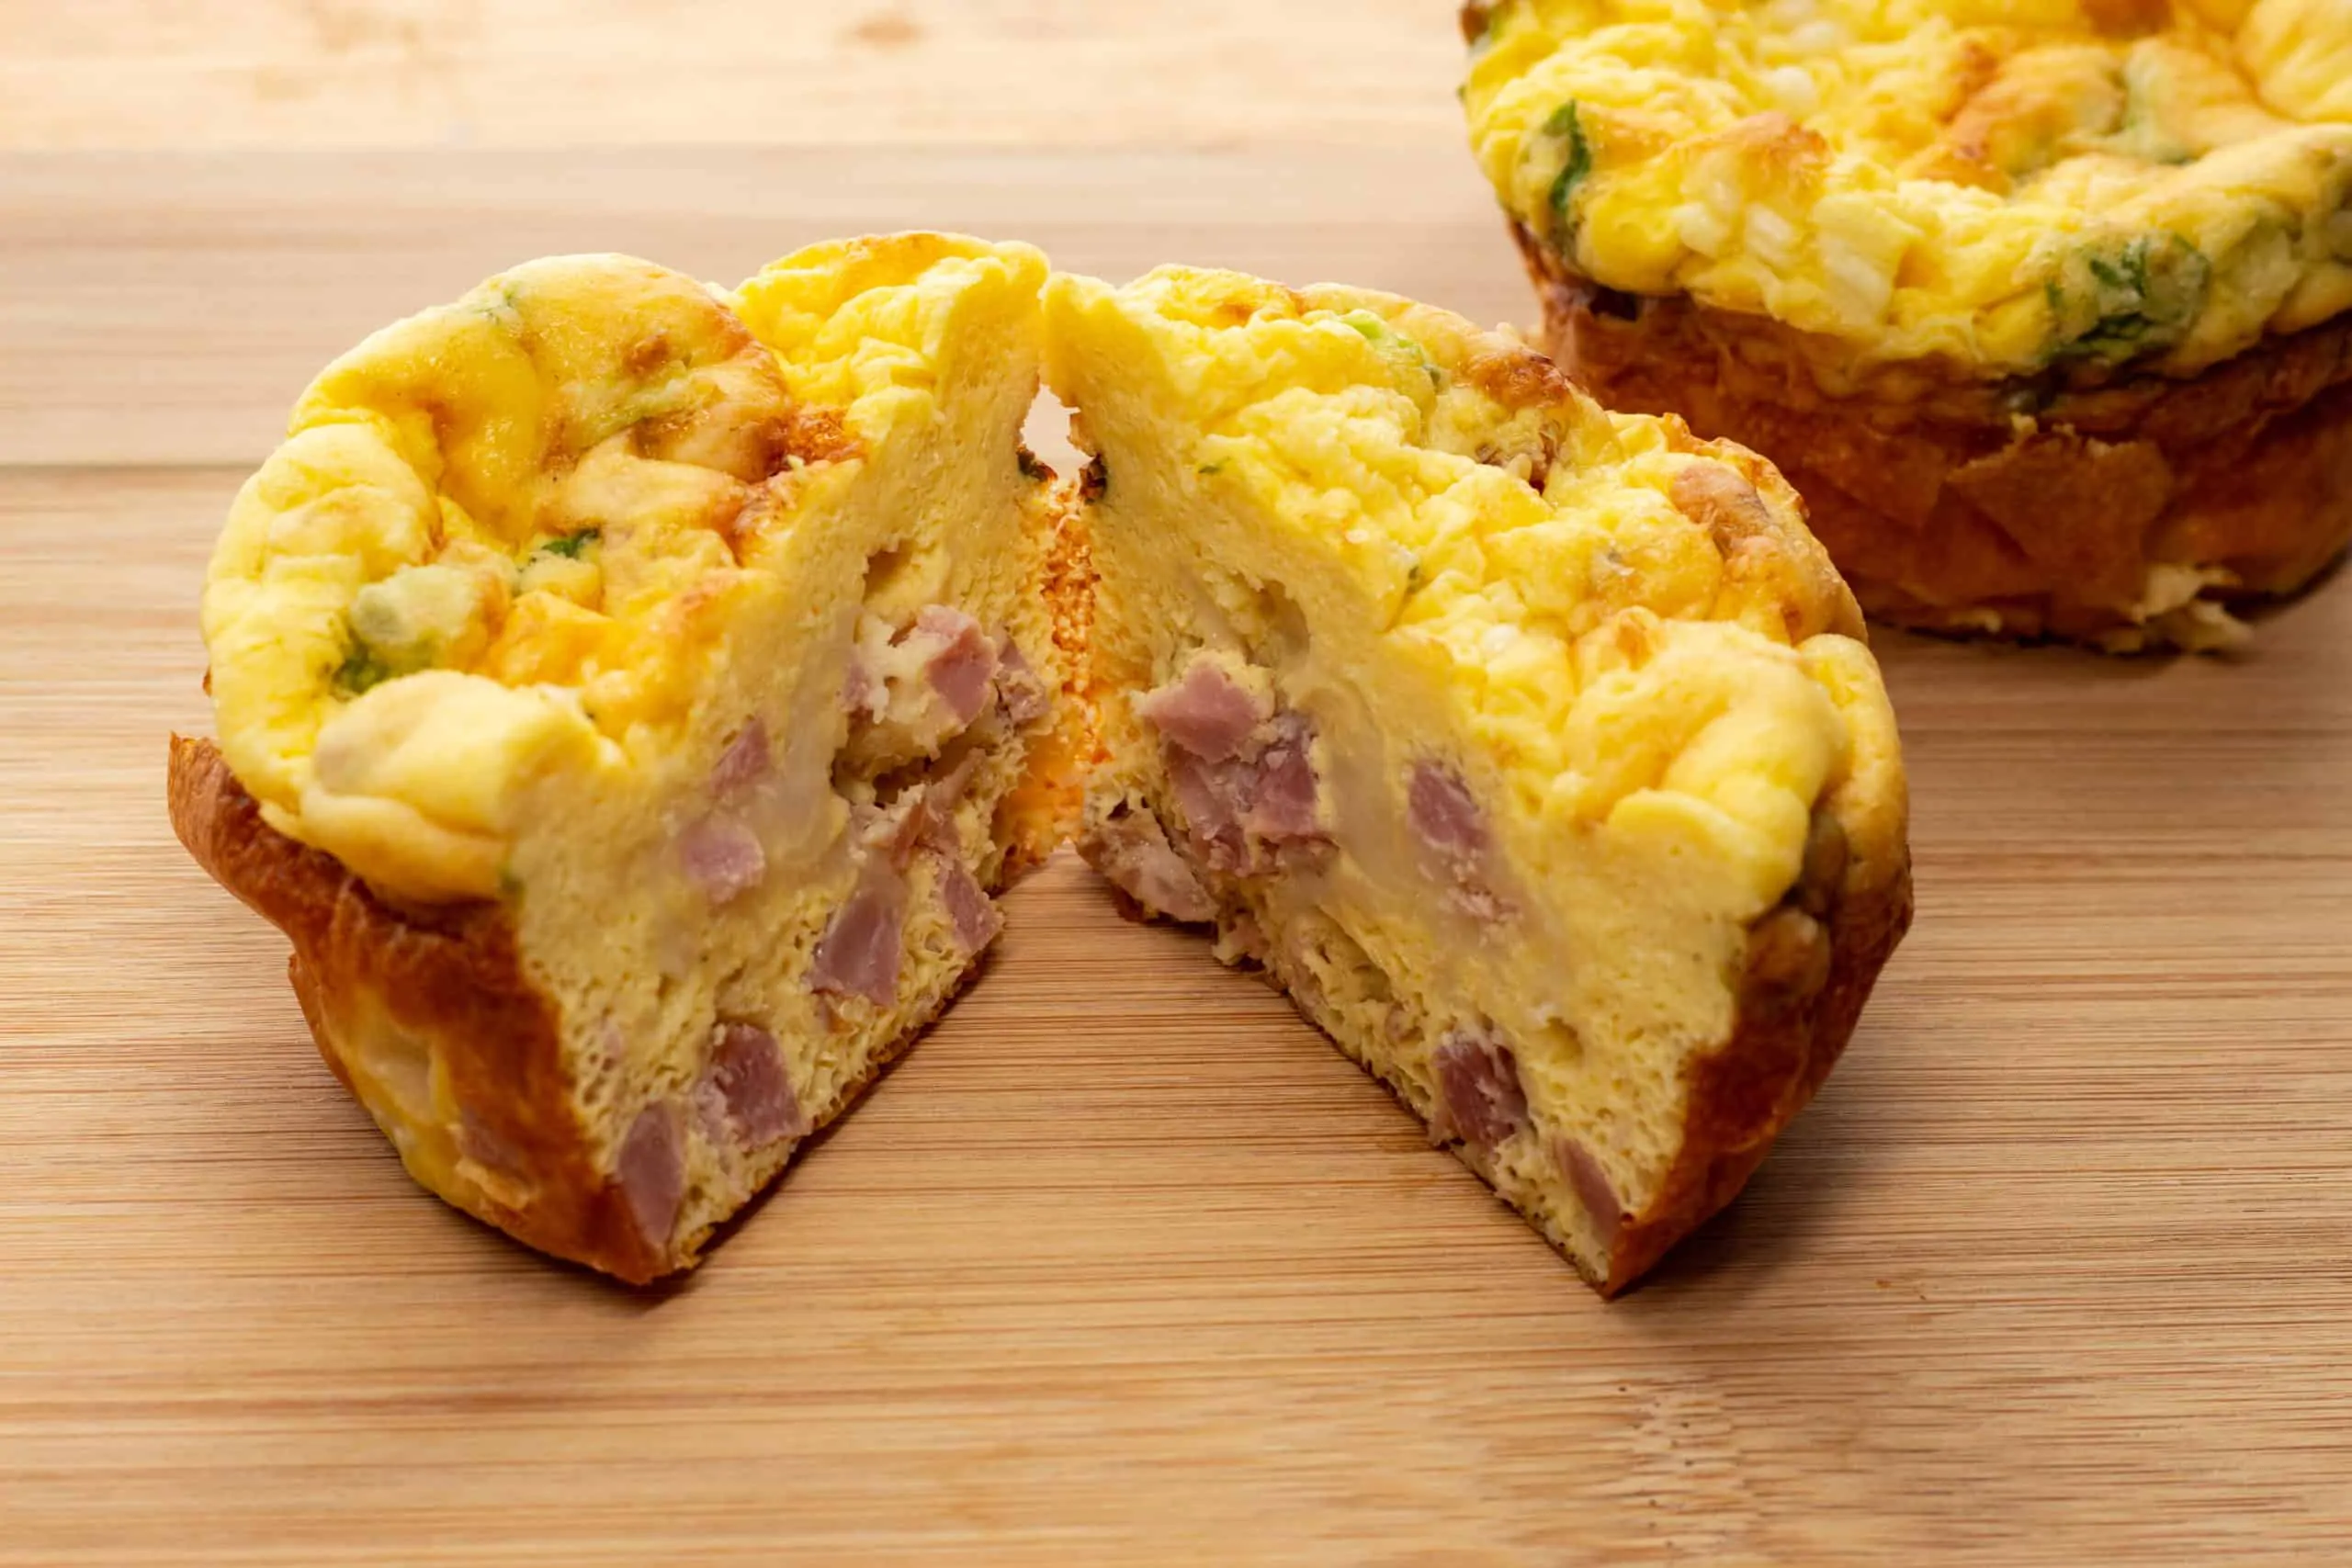 Keto friendly ham and cheese egg muffins.